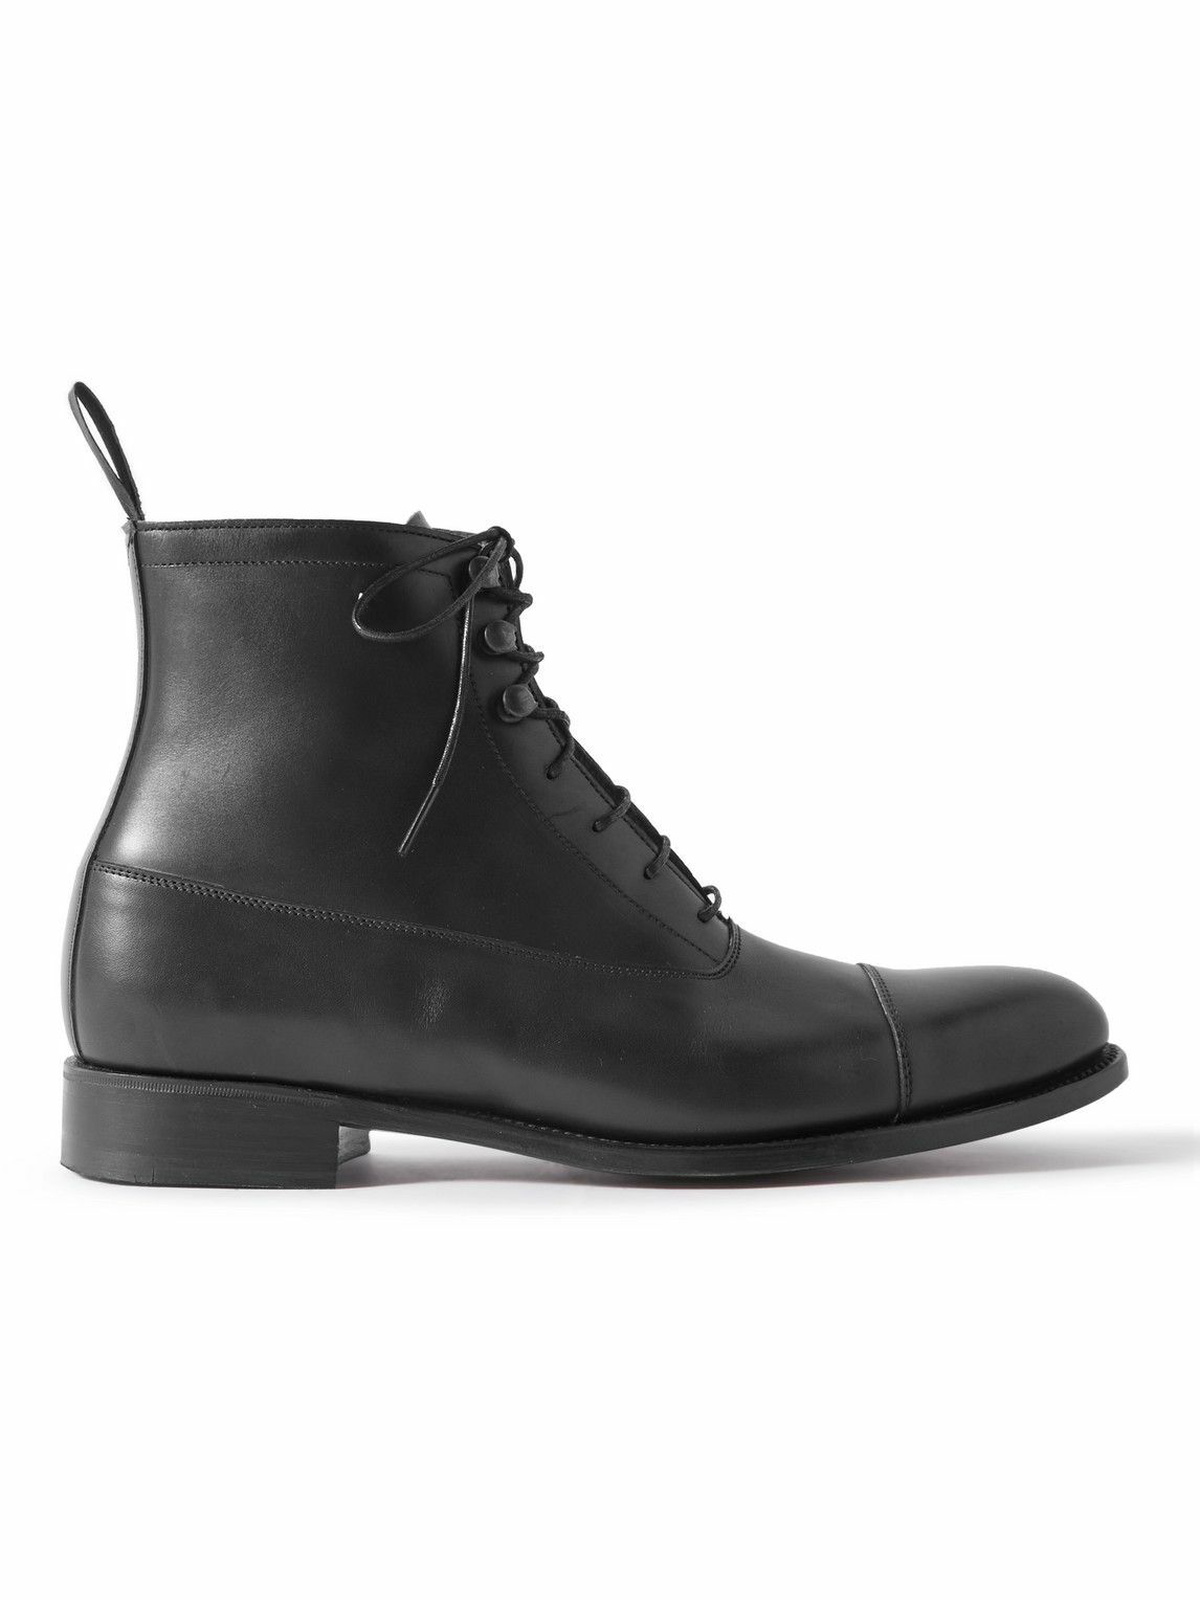 George Cleverley - Balmoral Leather Lace-Up Boots - Black George Cleverley